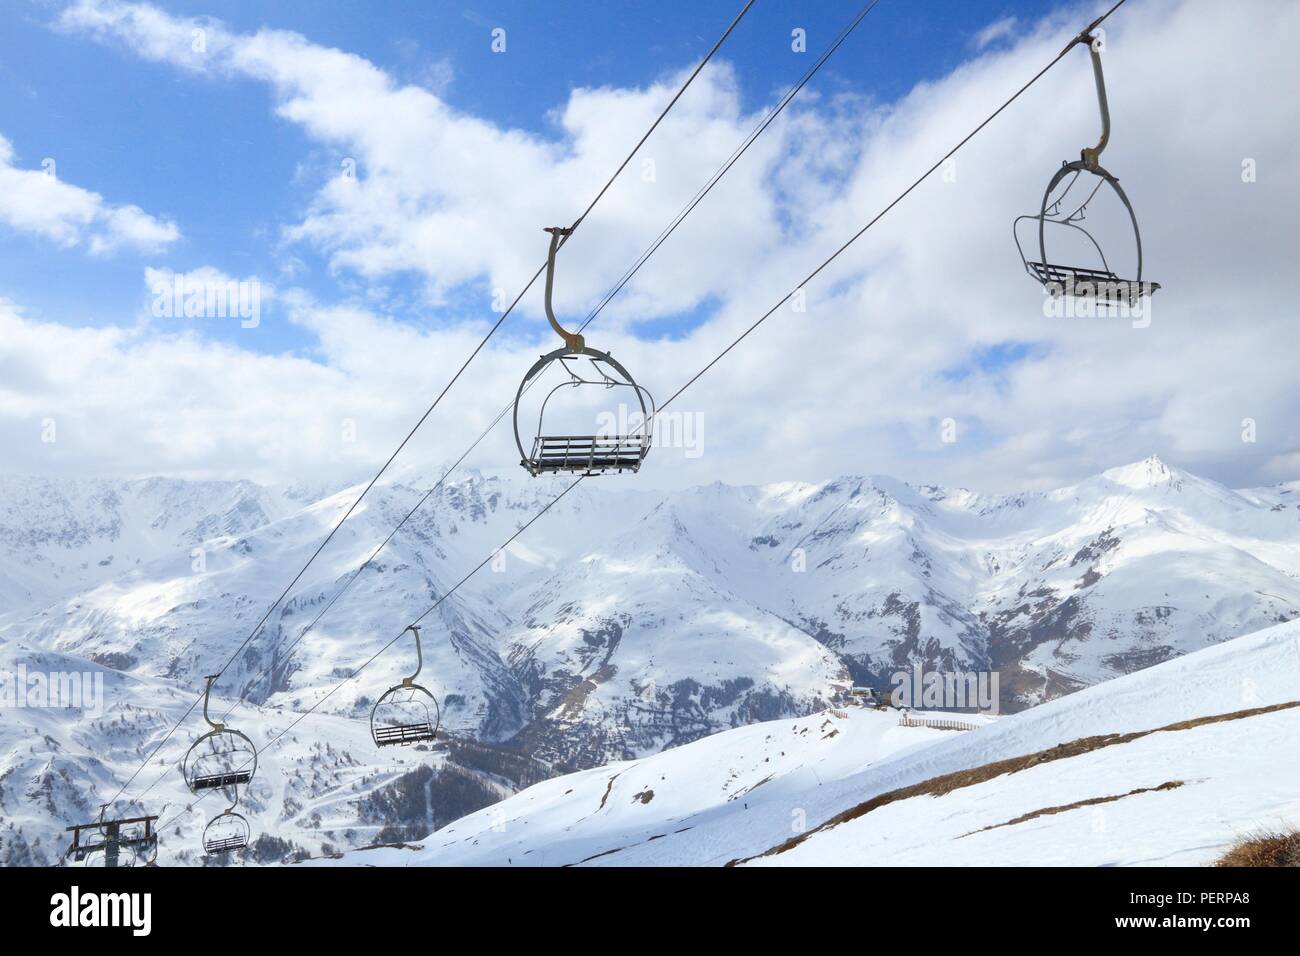 Ski lift in Galibier-Thabor skiing resort in France. Stock Photo